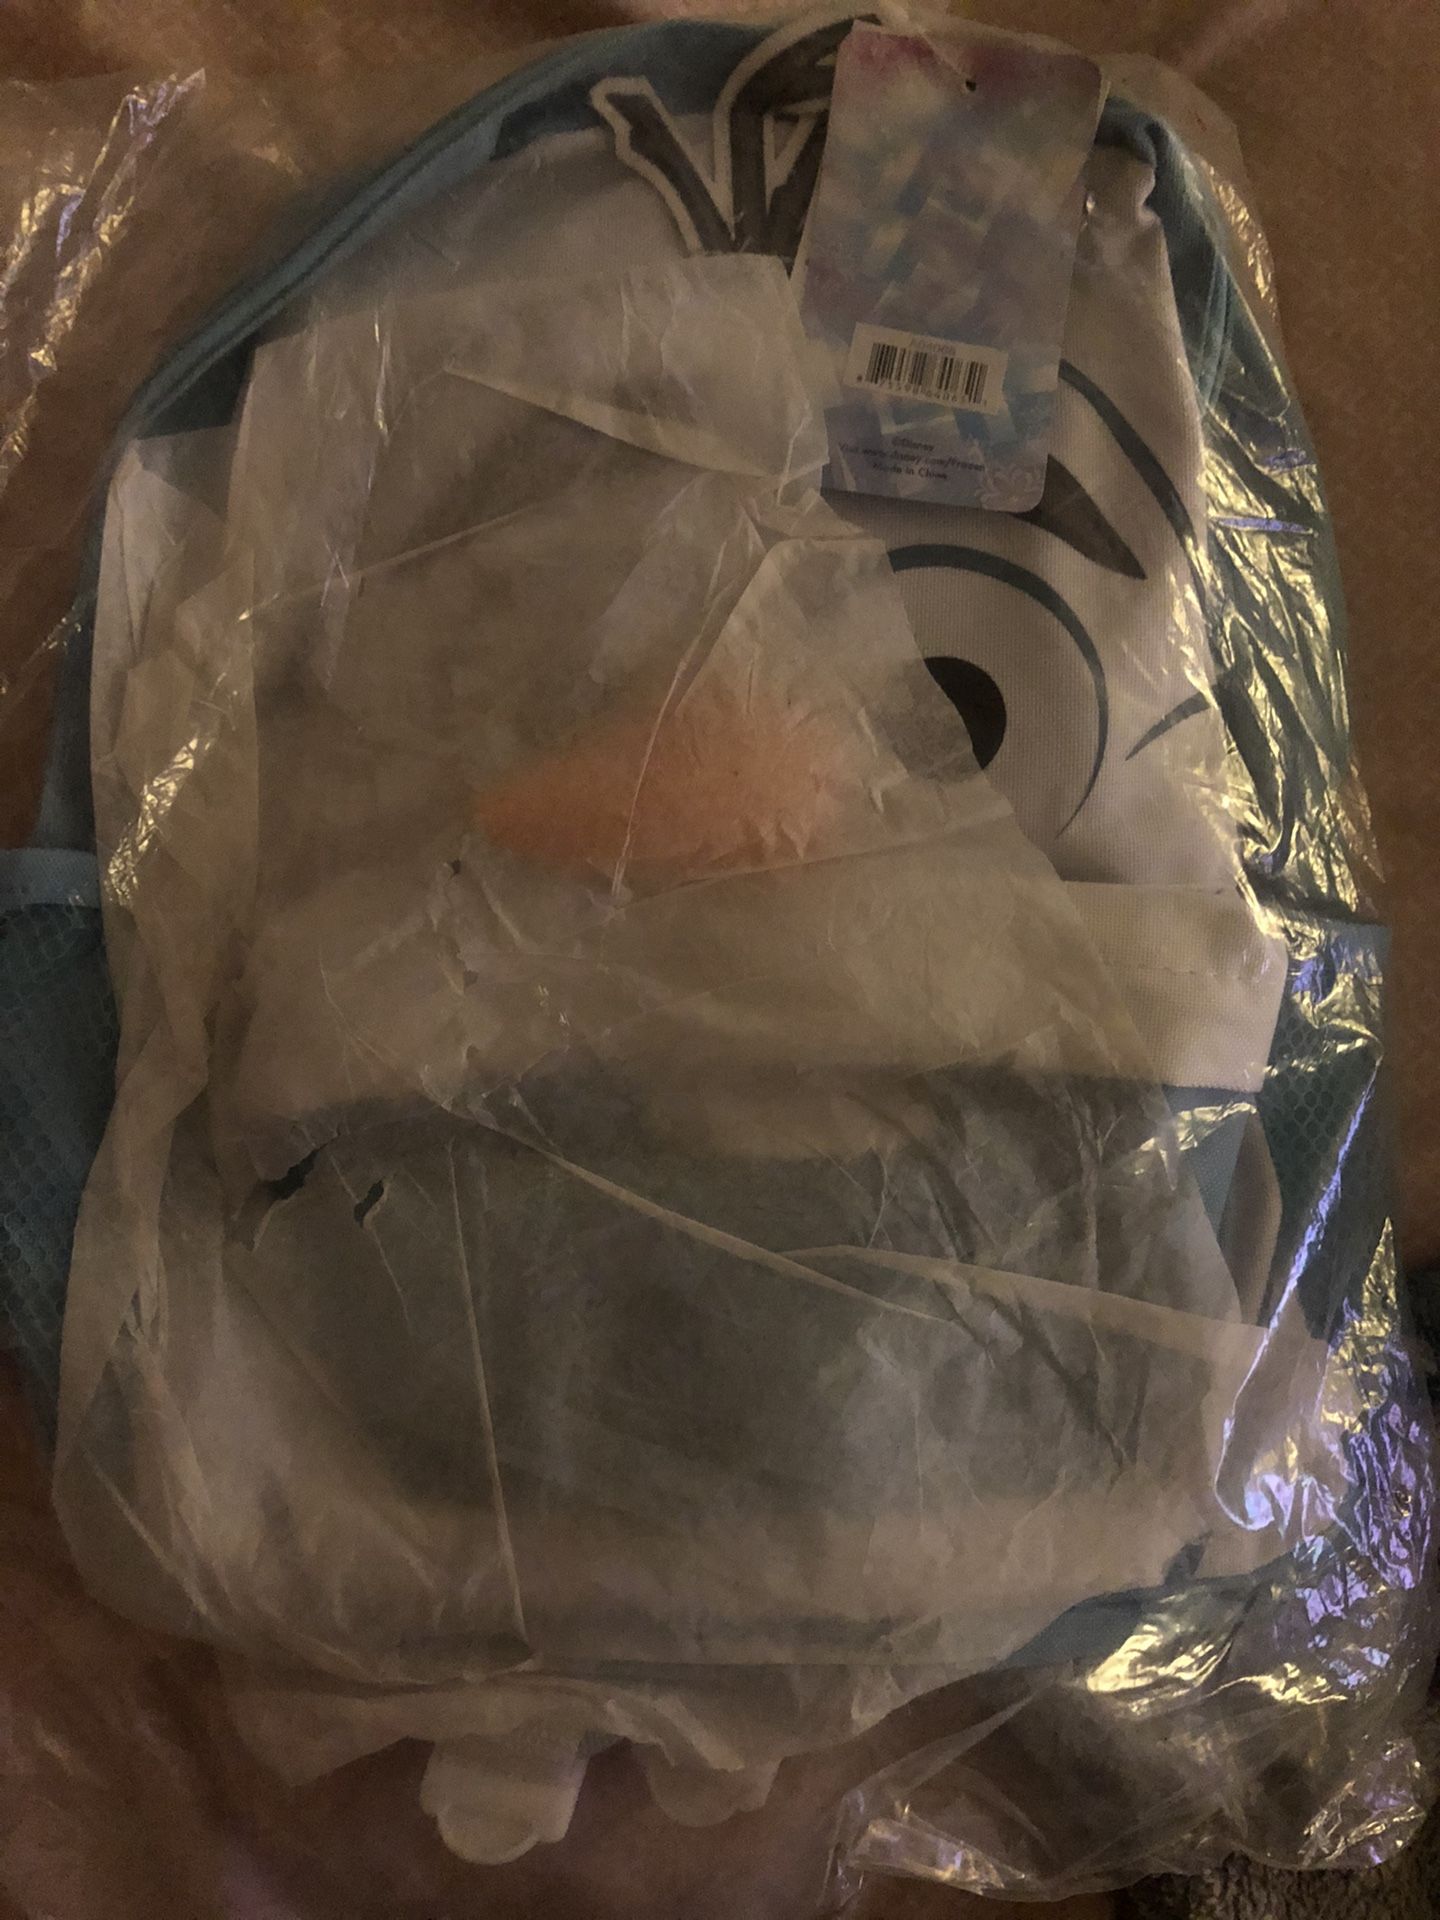 Frozen Olaf Mini Backpack For Kids Cute New